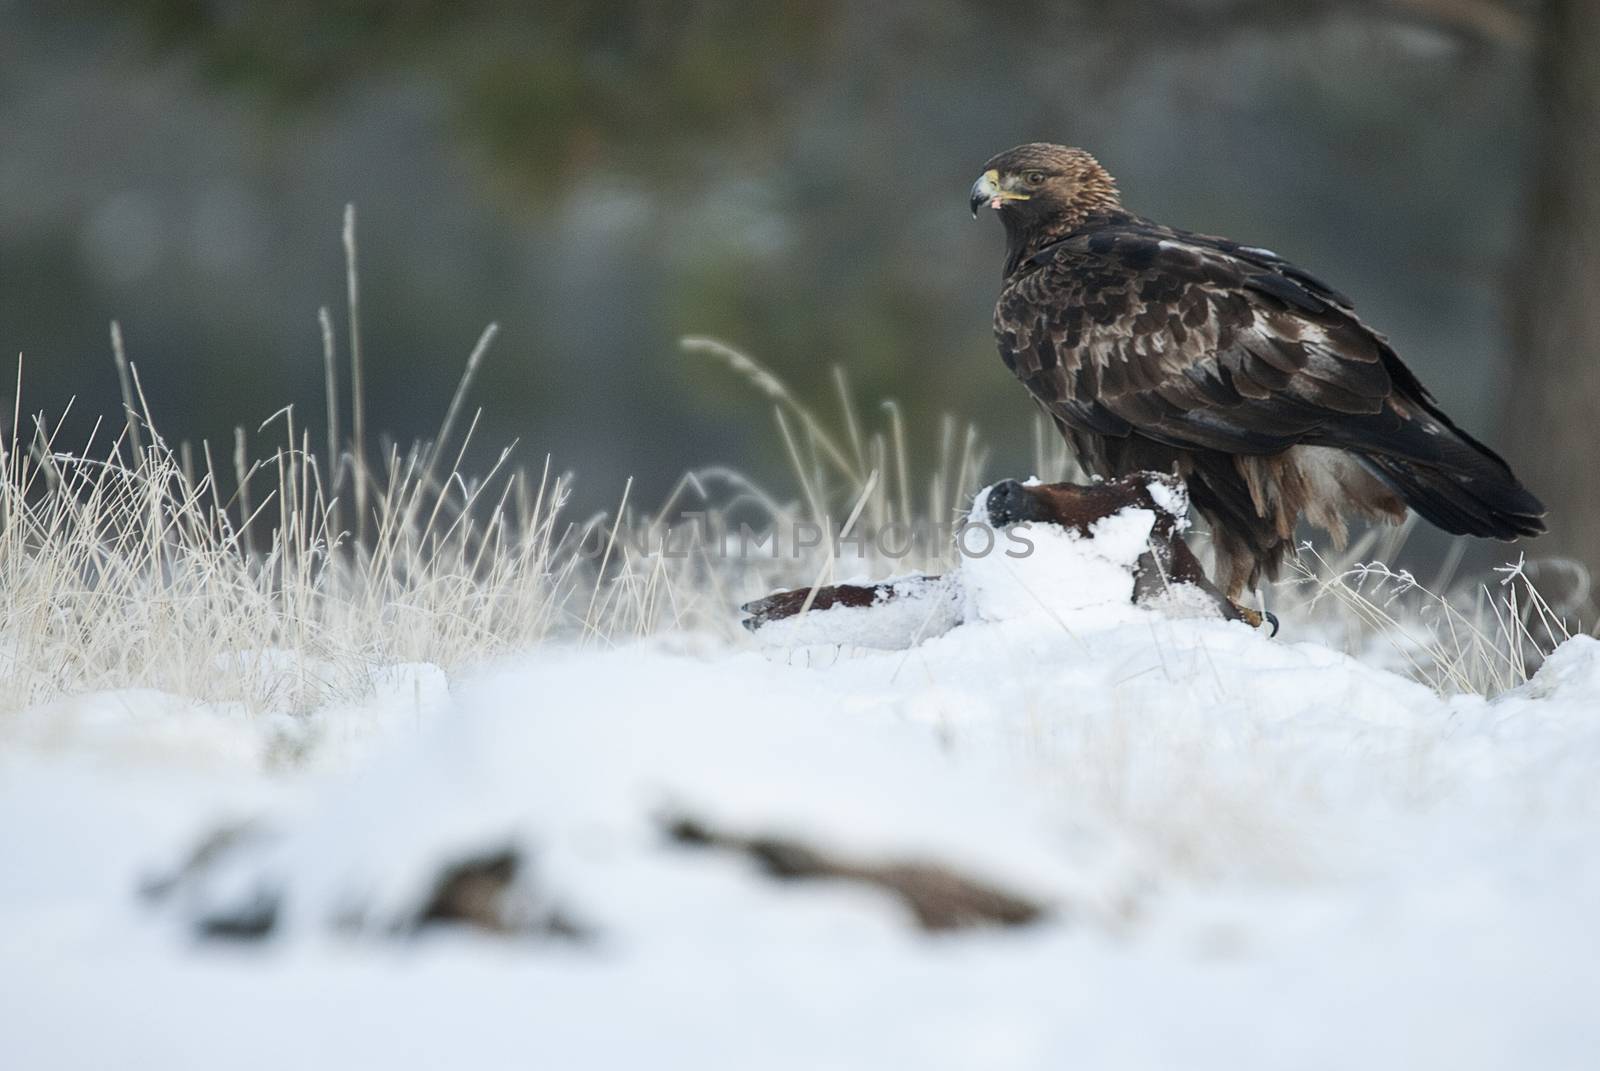 golden eagle (Aquila chrysaetos), in the snow eating carola from by jalonsohu@gmail.com